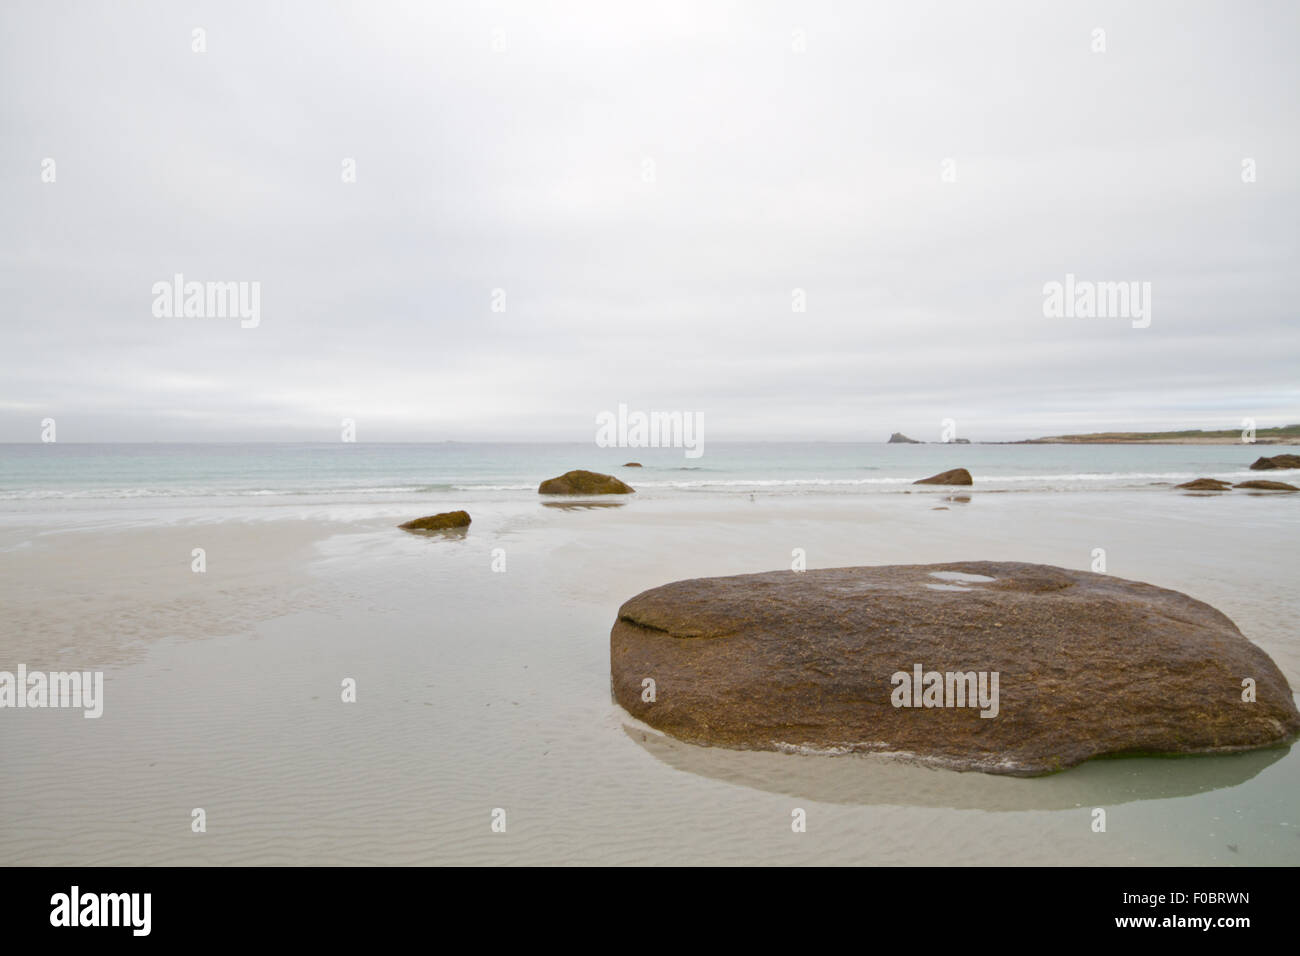 Rocks and stones on a beach on the Atlantic coast of Brittany, France Stock Photo